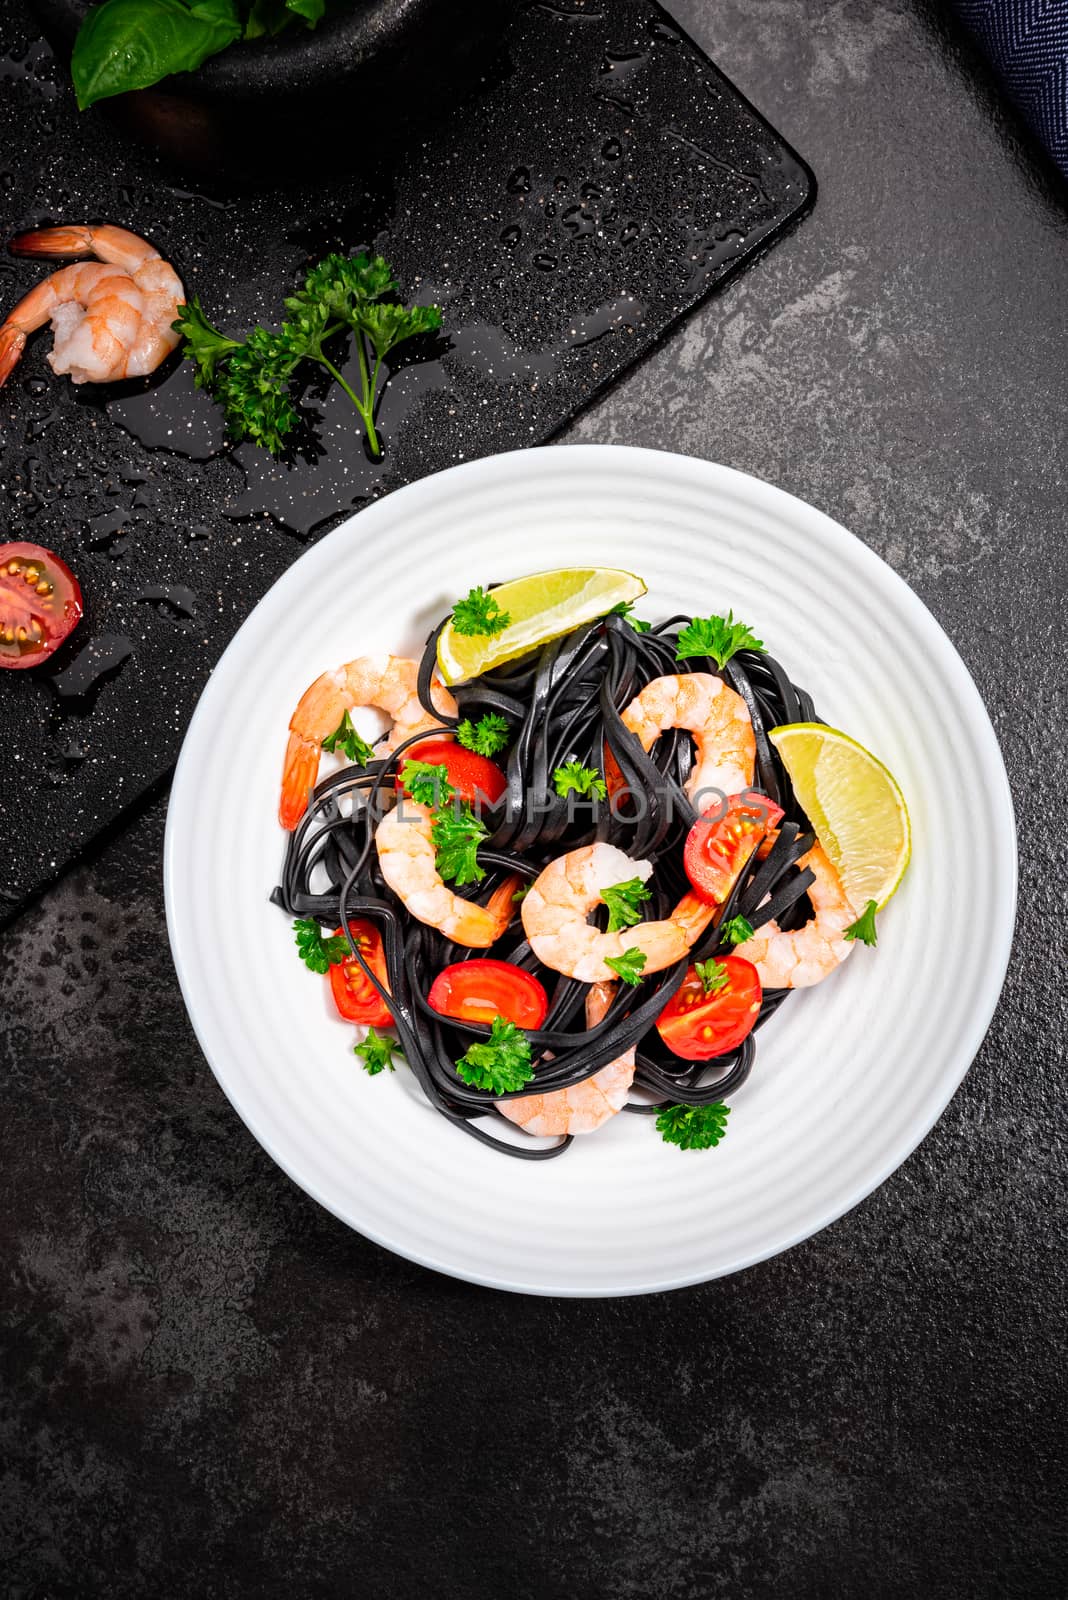 Black Pasta - Squid Ink, with Prawns, Seafood,Lemon and Tomatoes in White Bowl on  Dark Background. Top view.